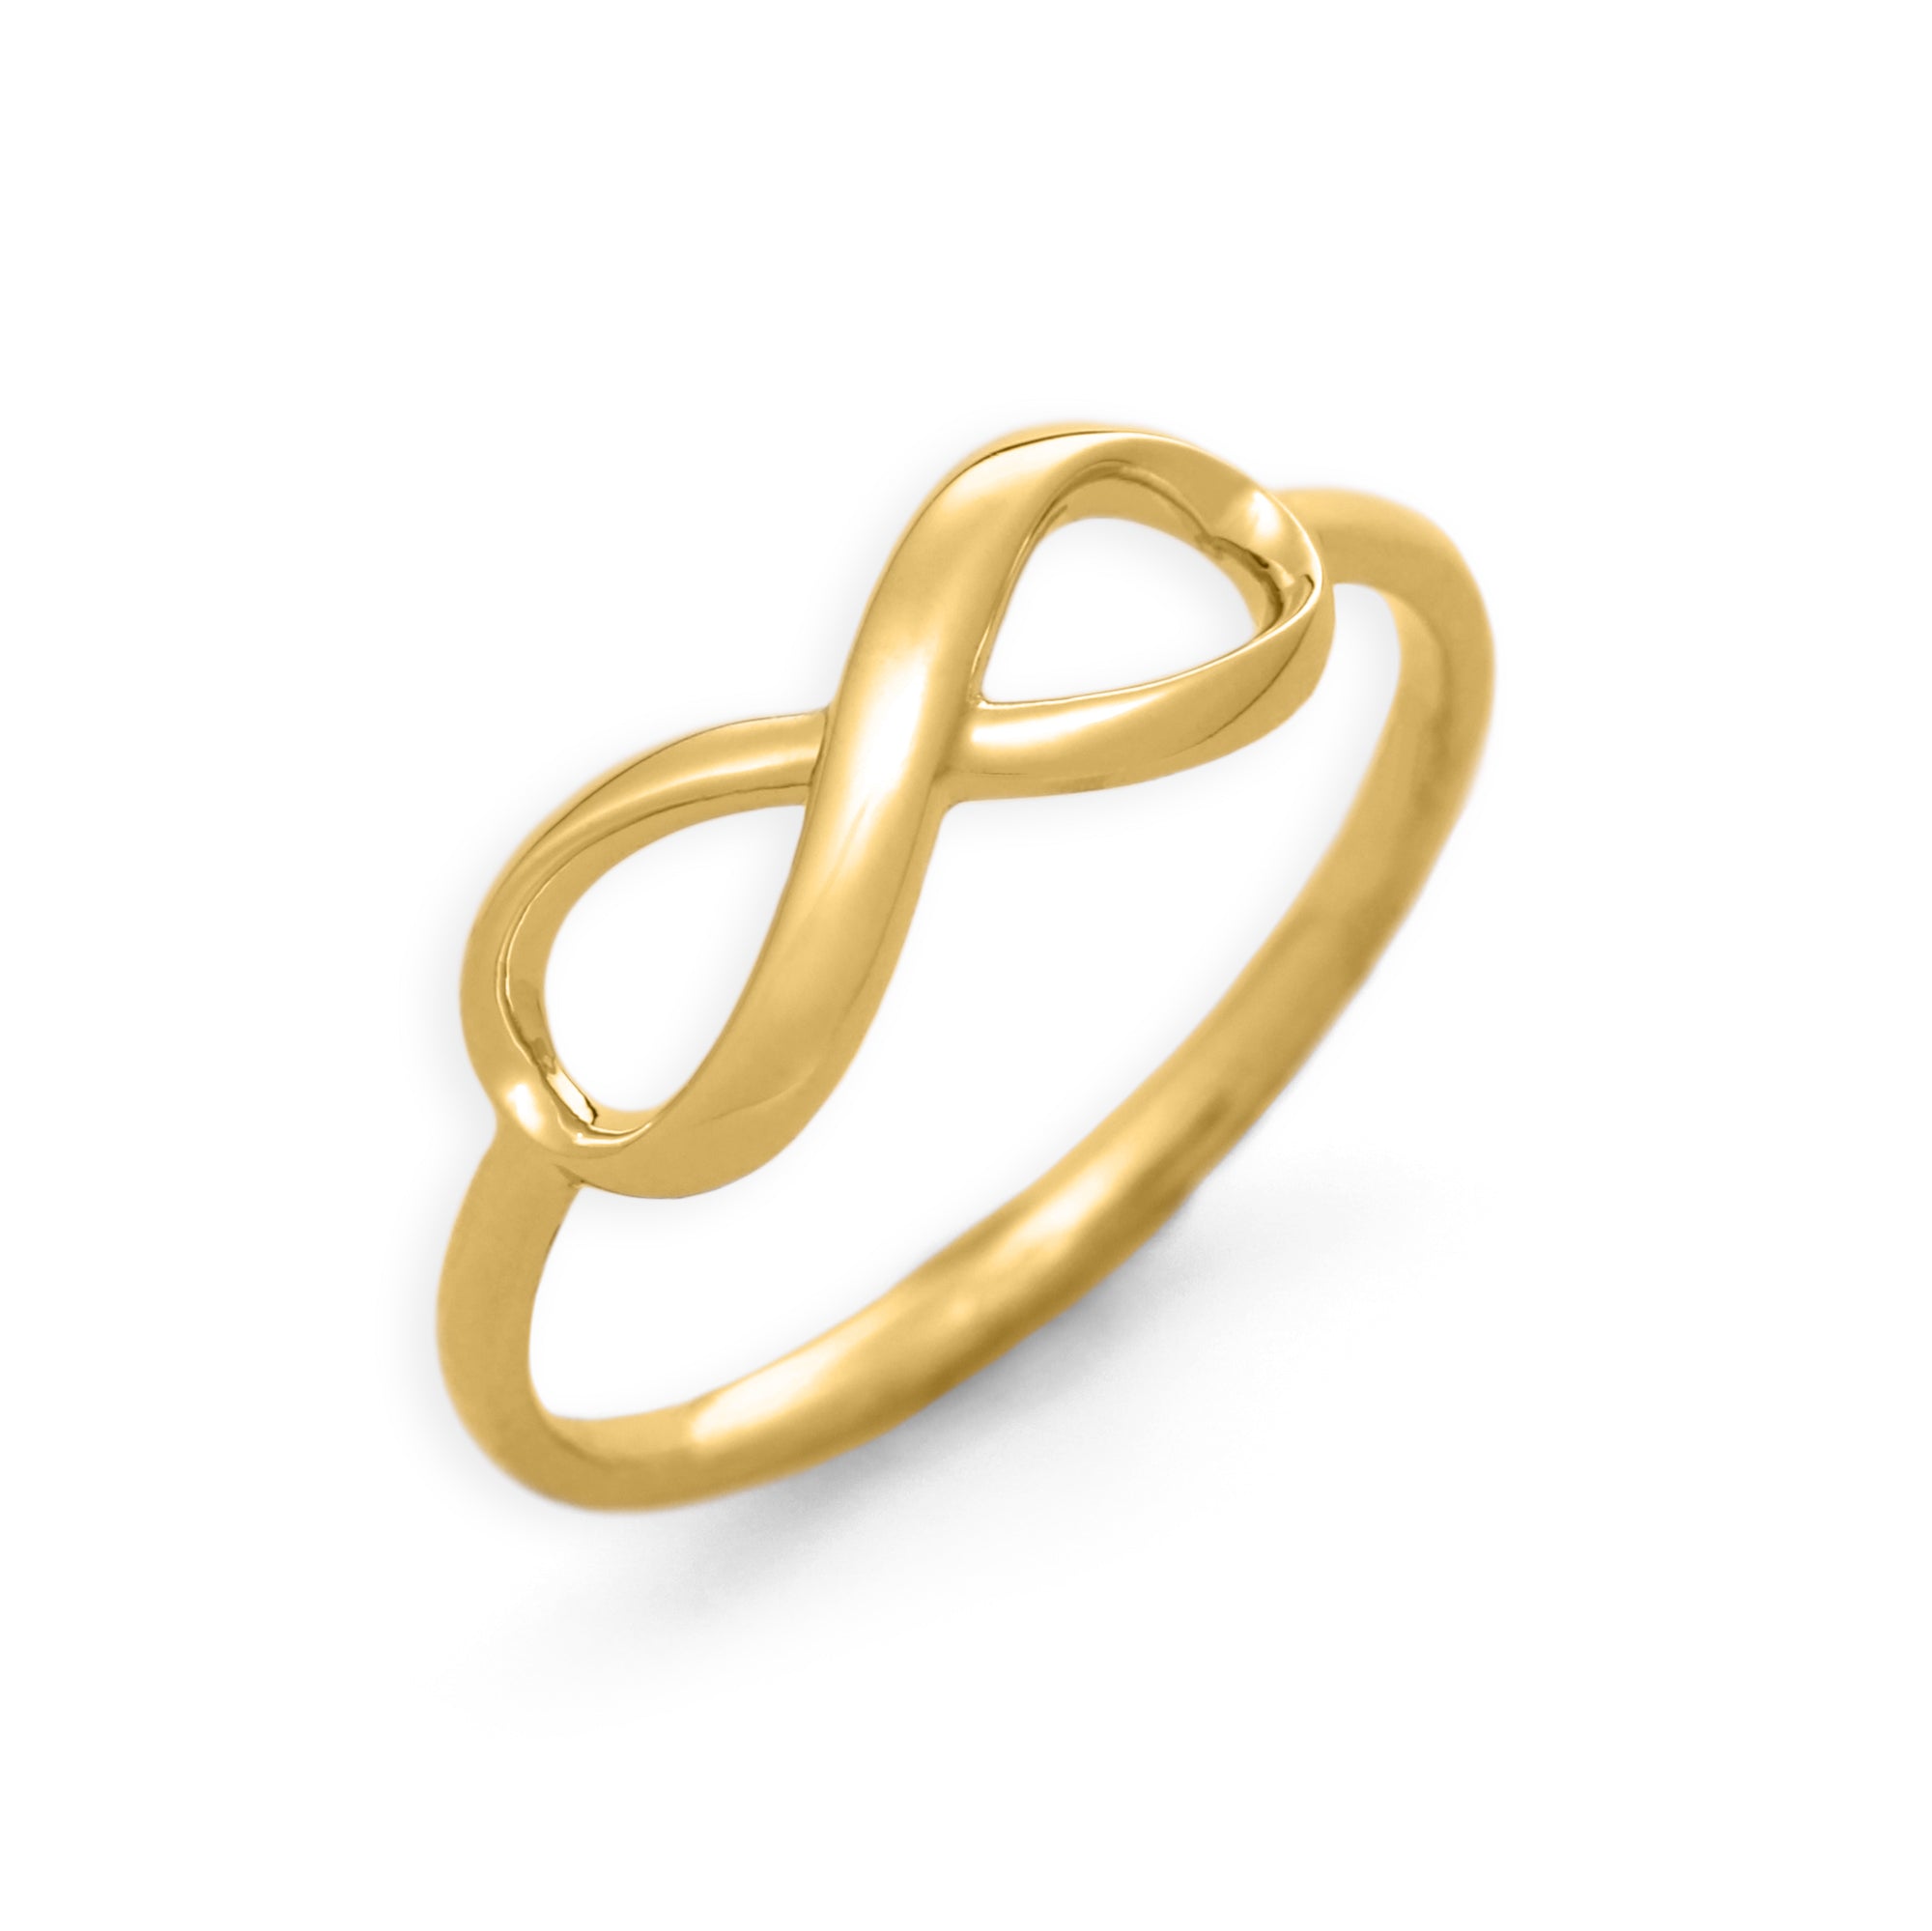 Gold Plated Infinity Ring Eternity Ring Charms Best Friend Gift Endless  Love Symbol Fashion Rings For Women